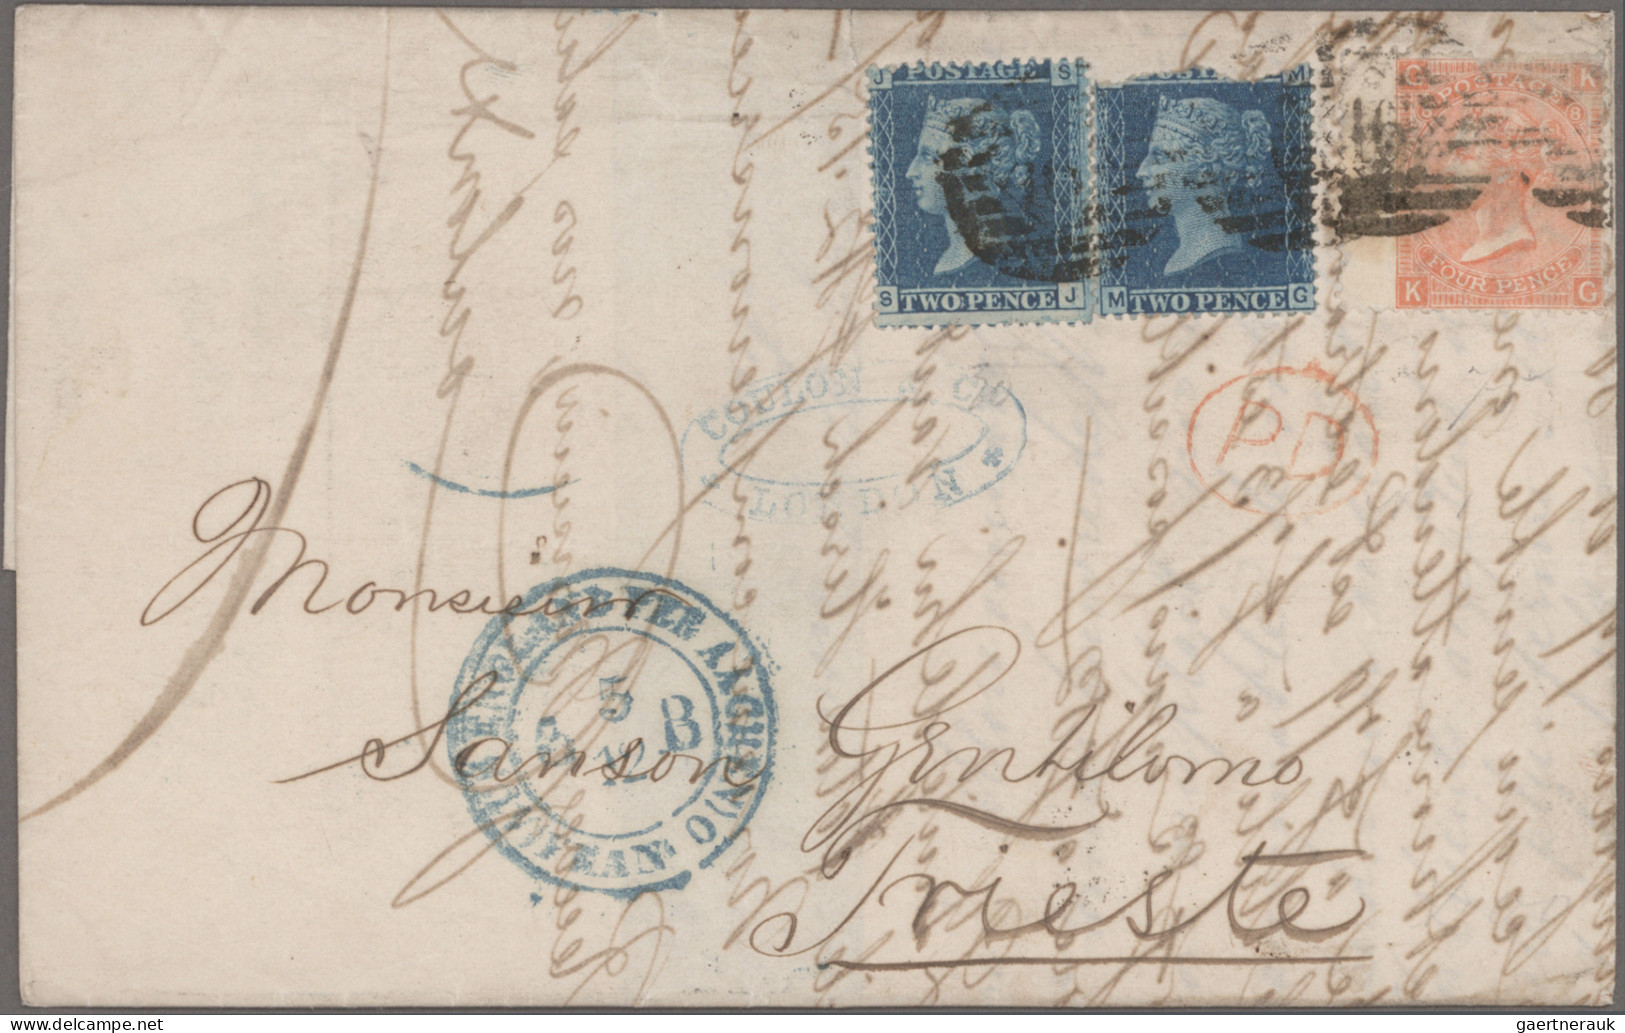 Great Britain: 1835/1890's: 40 covers, postcards and a parcel label all franked